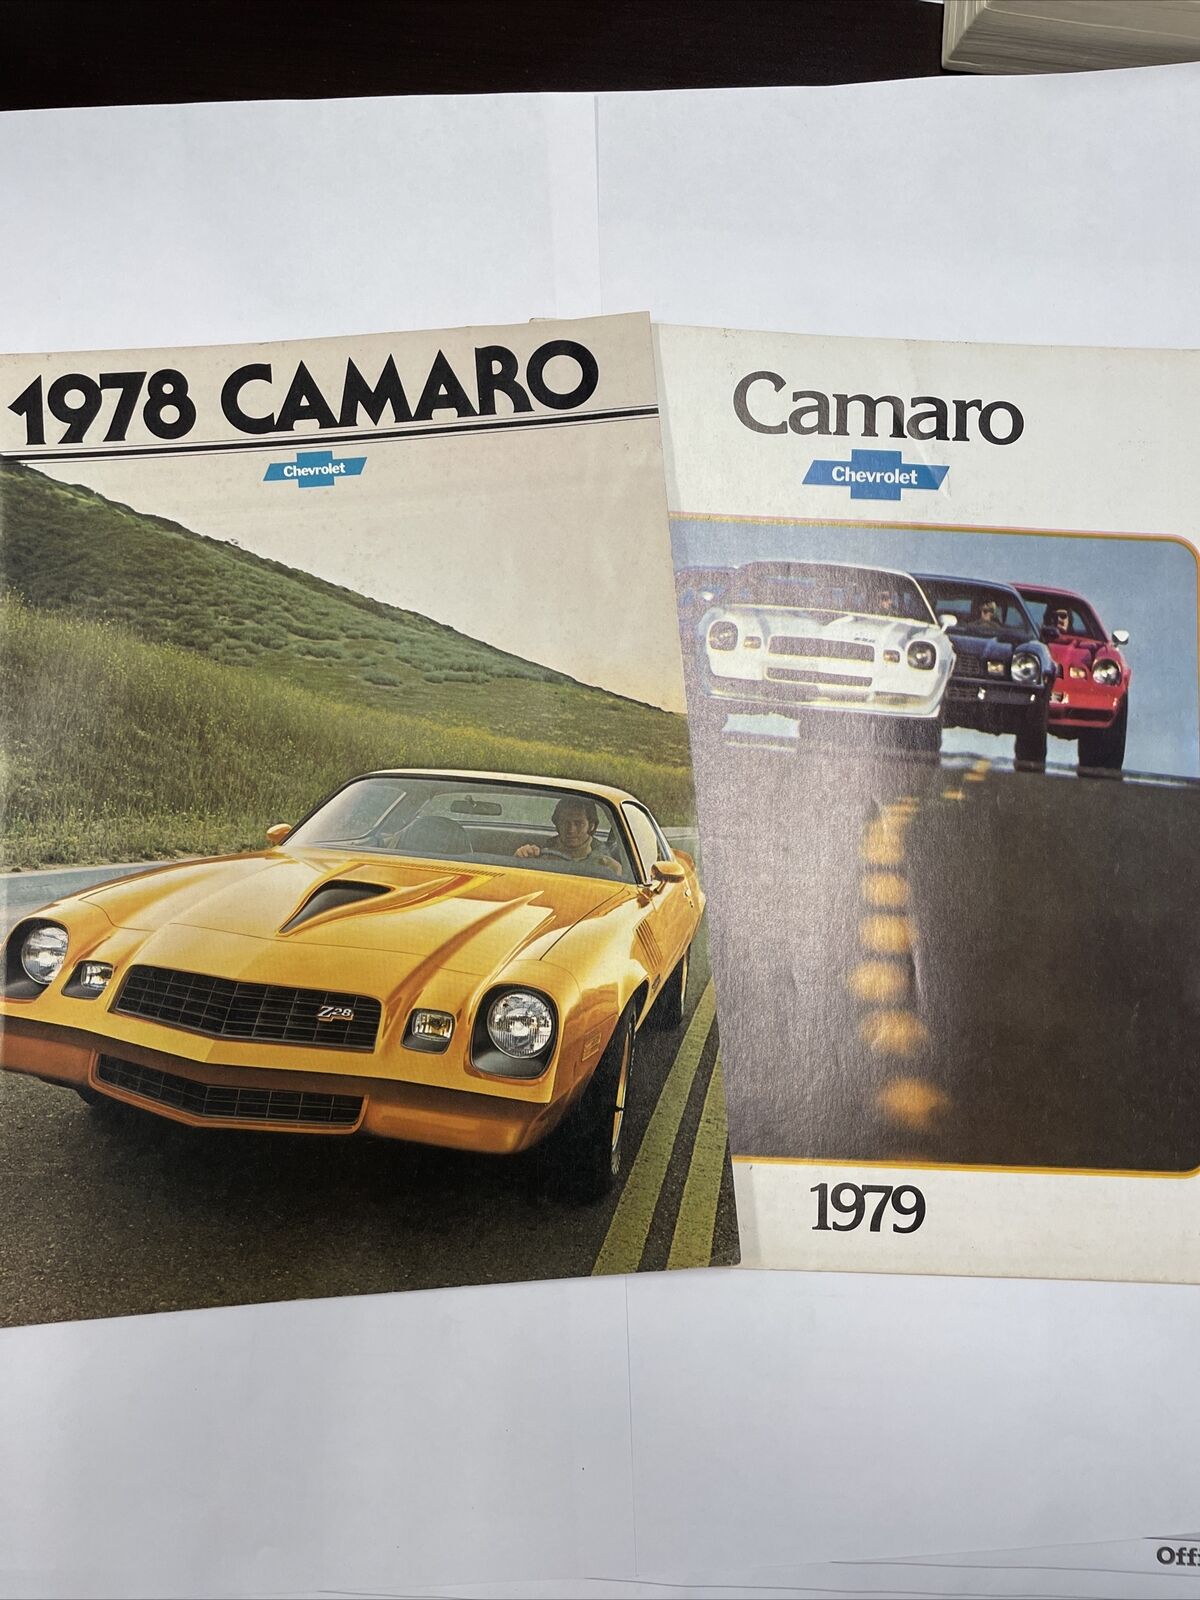 Vintage 1978-79 Chevy Camaro Brochures Lot Of 2 Made In USA 🇺🇸